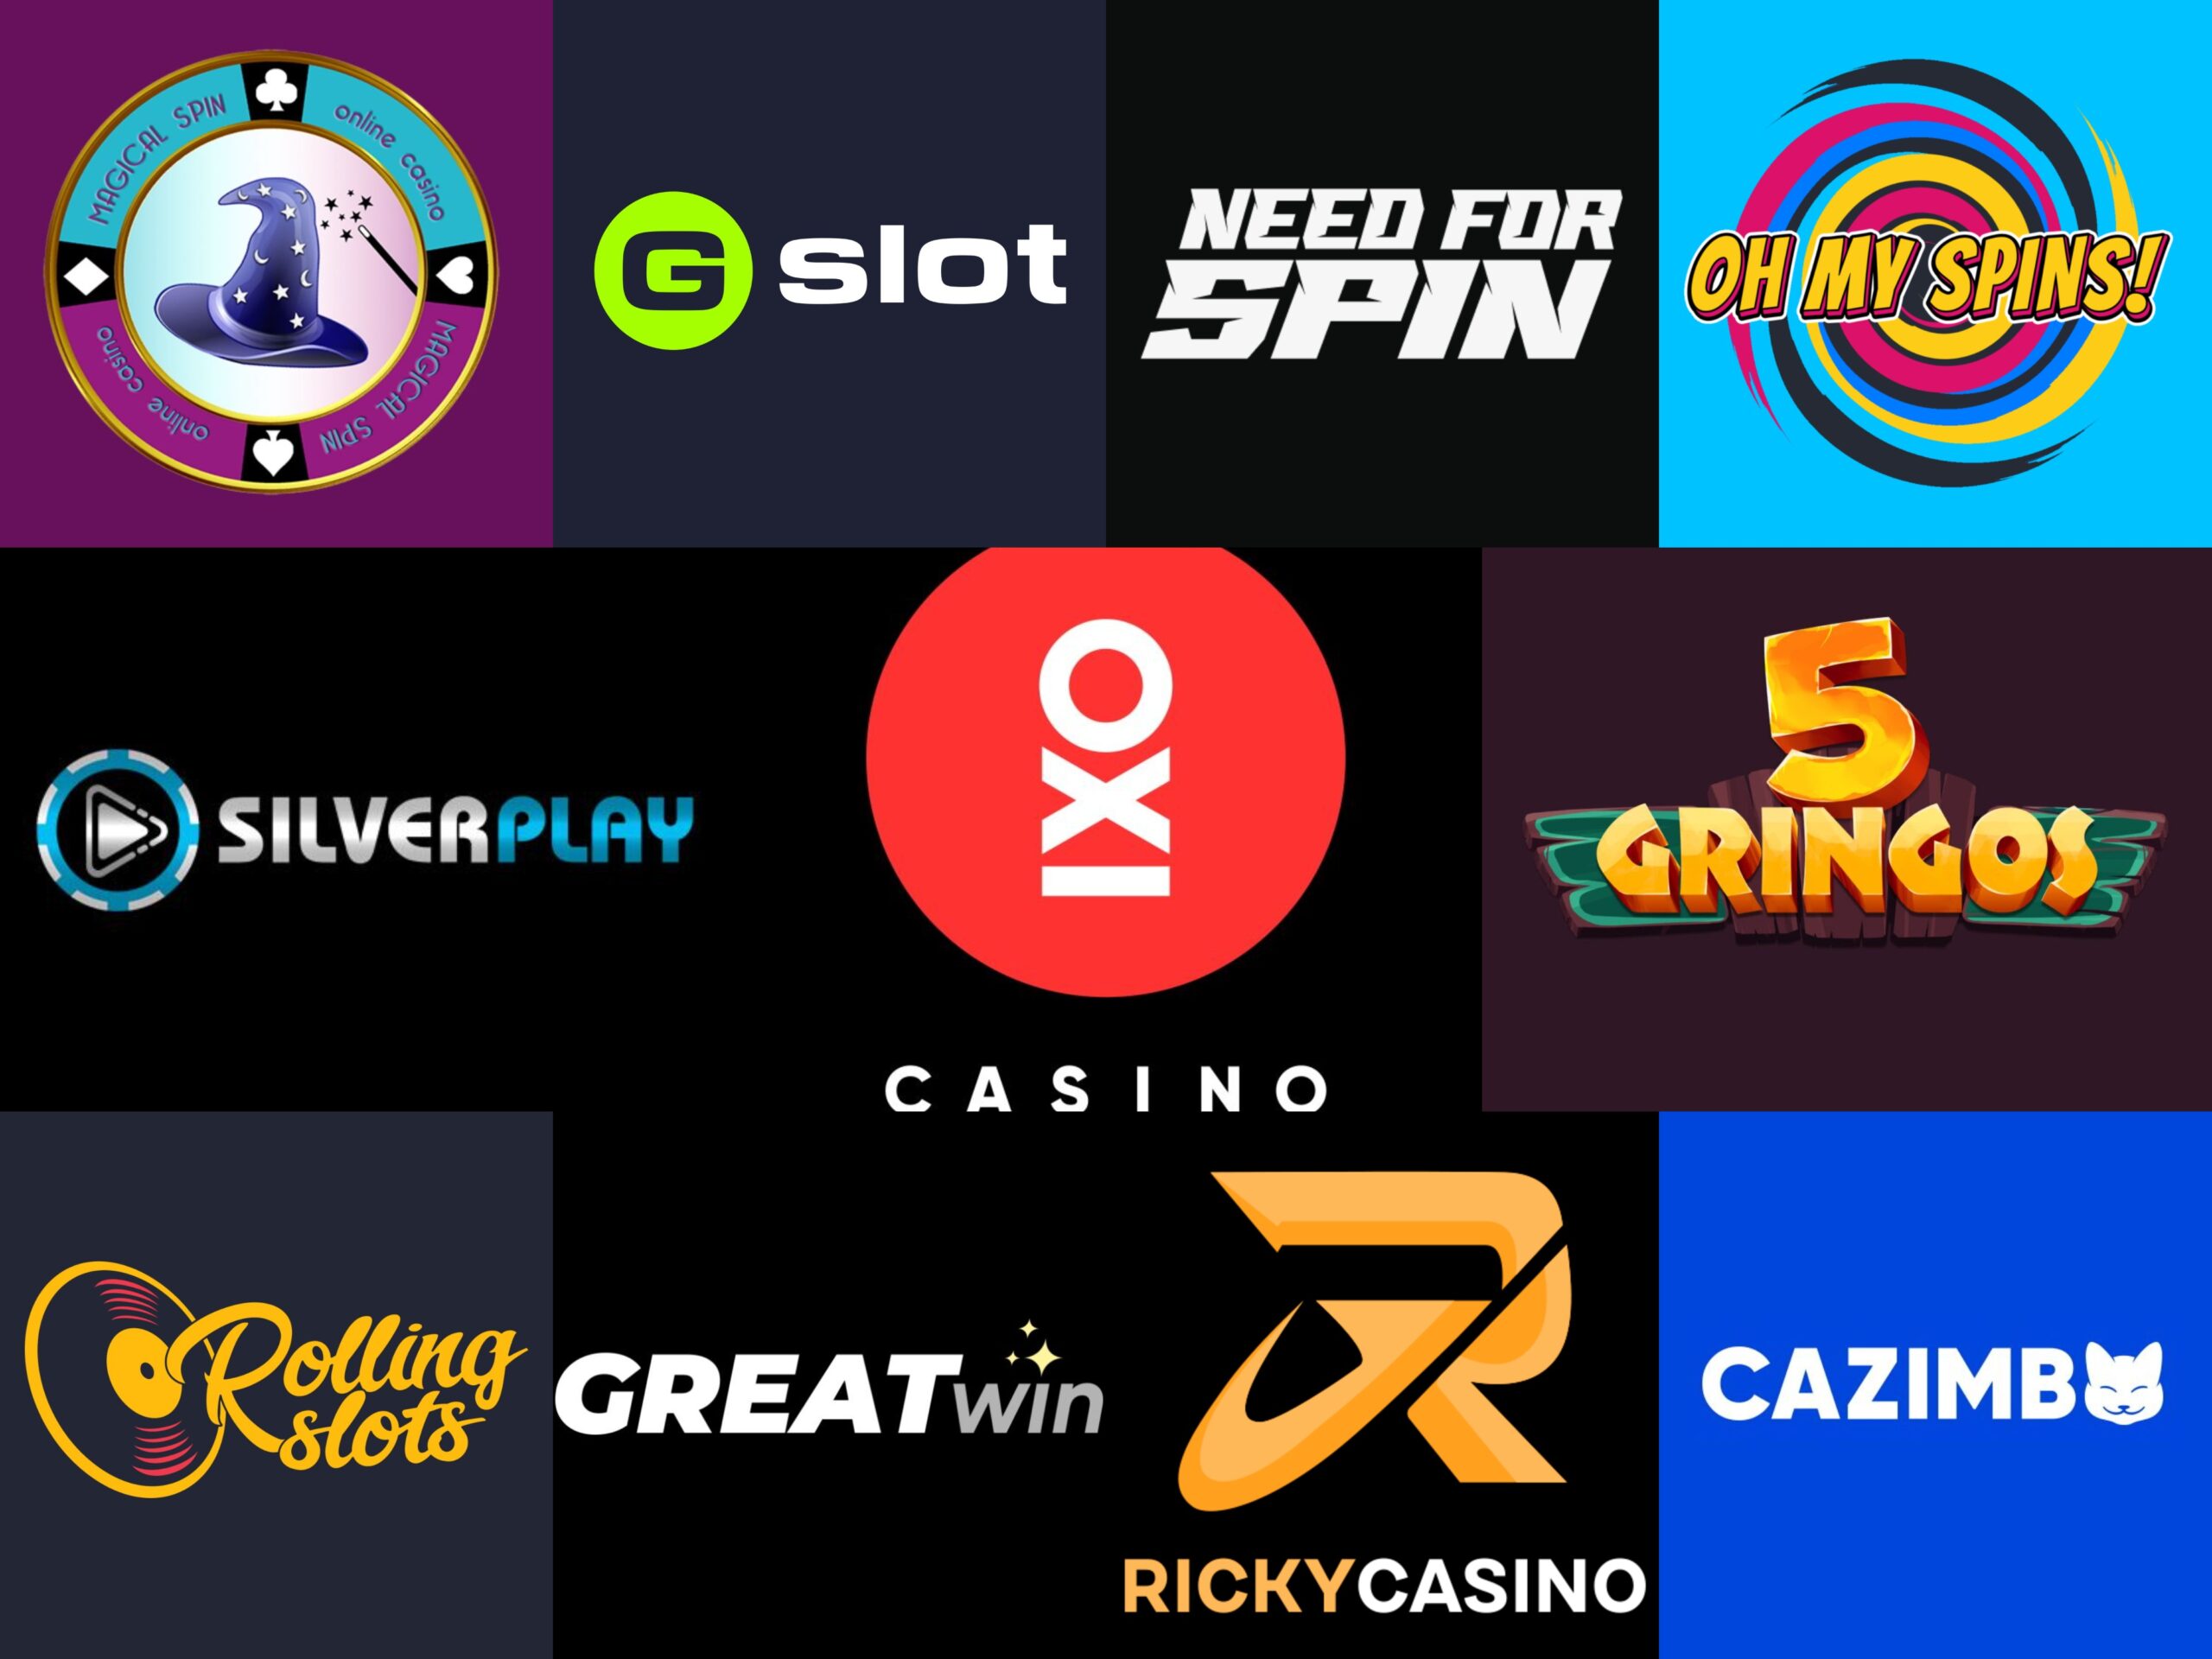 Online Echtgeld Casino - What Do Those Stats Really Mean?